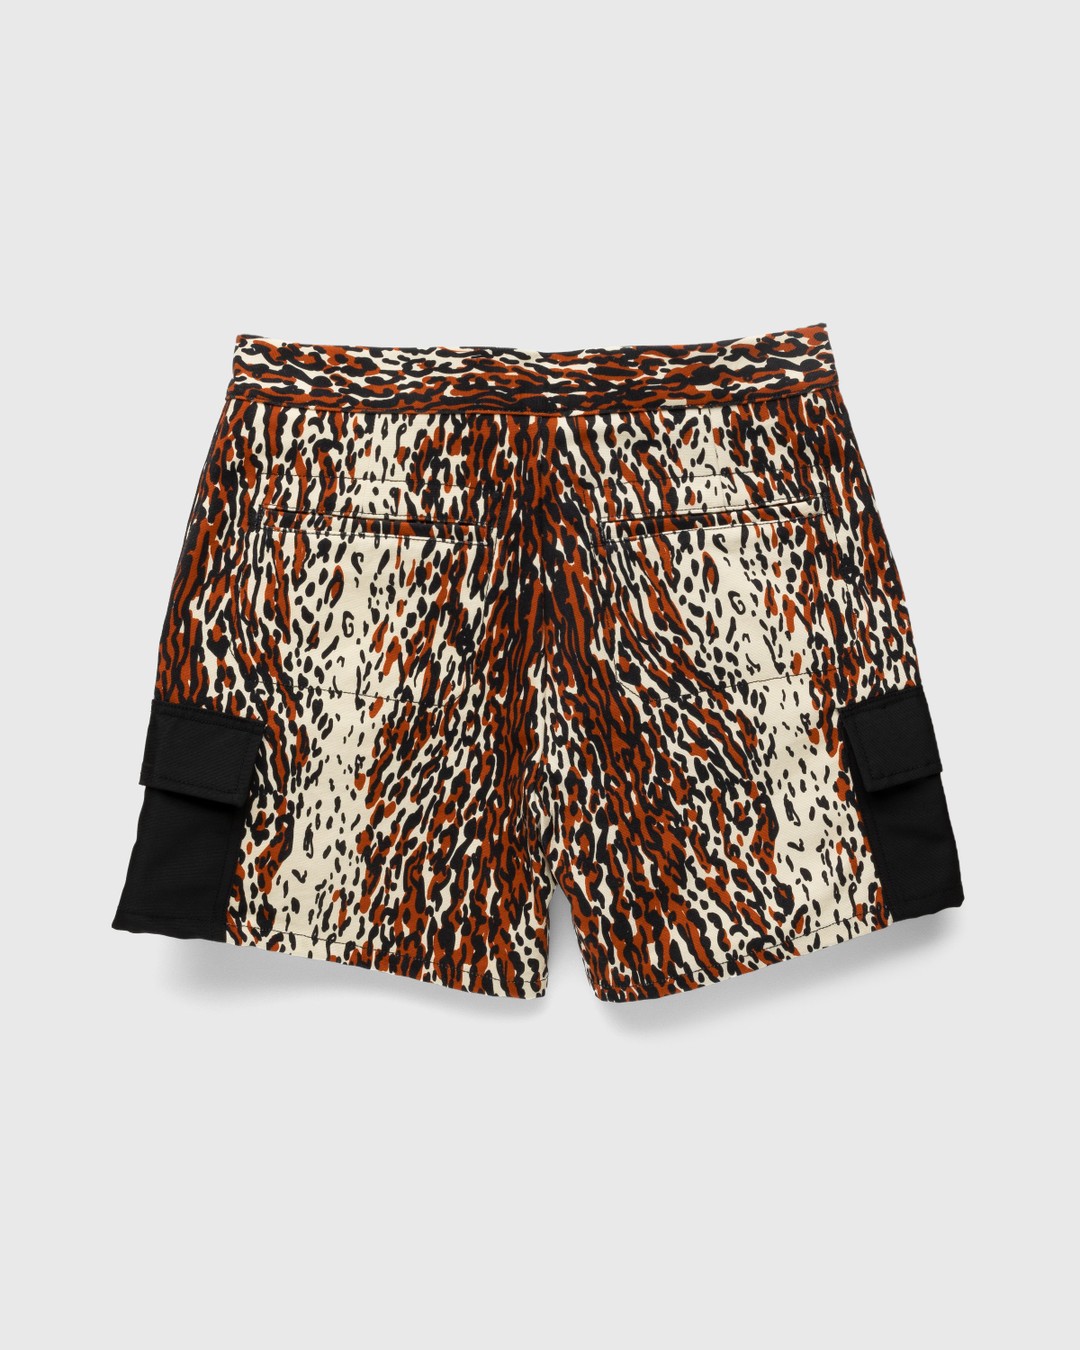 Phipps – Action Shorts Printed Canvas Leopard - Active Shorts - Brown - Image 2